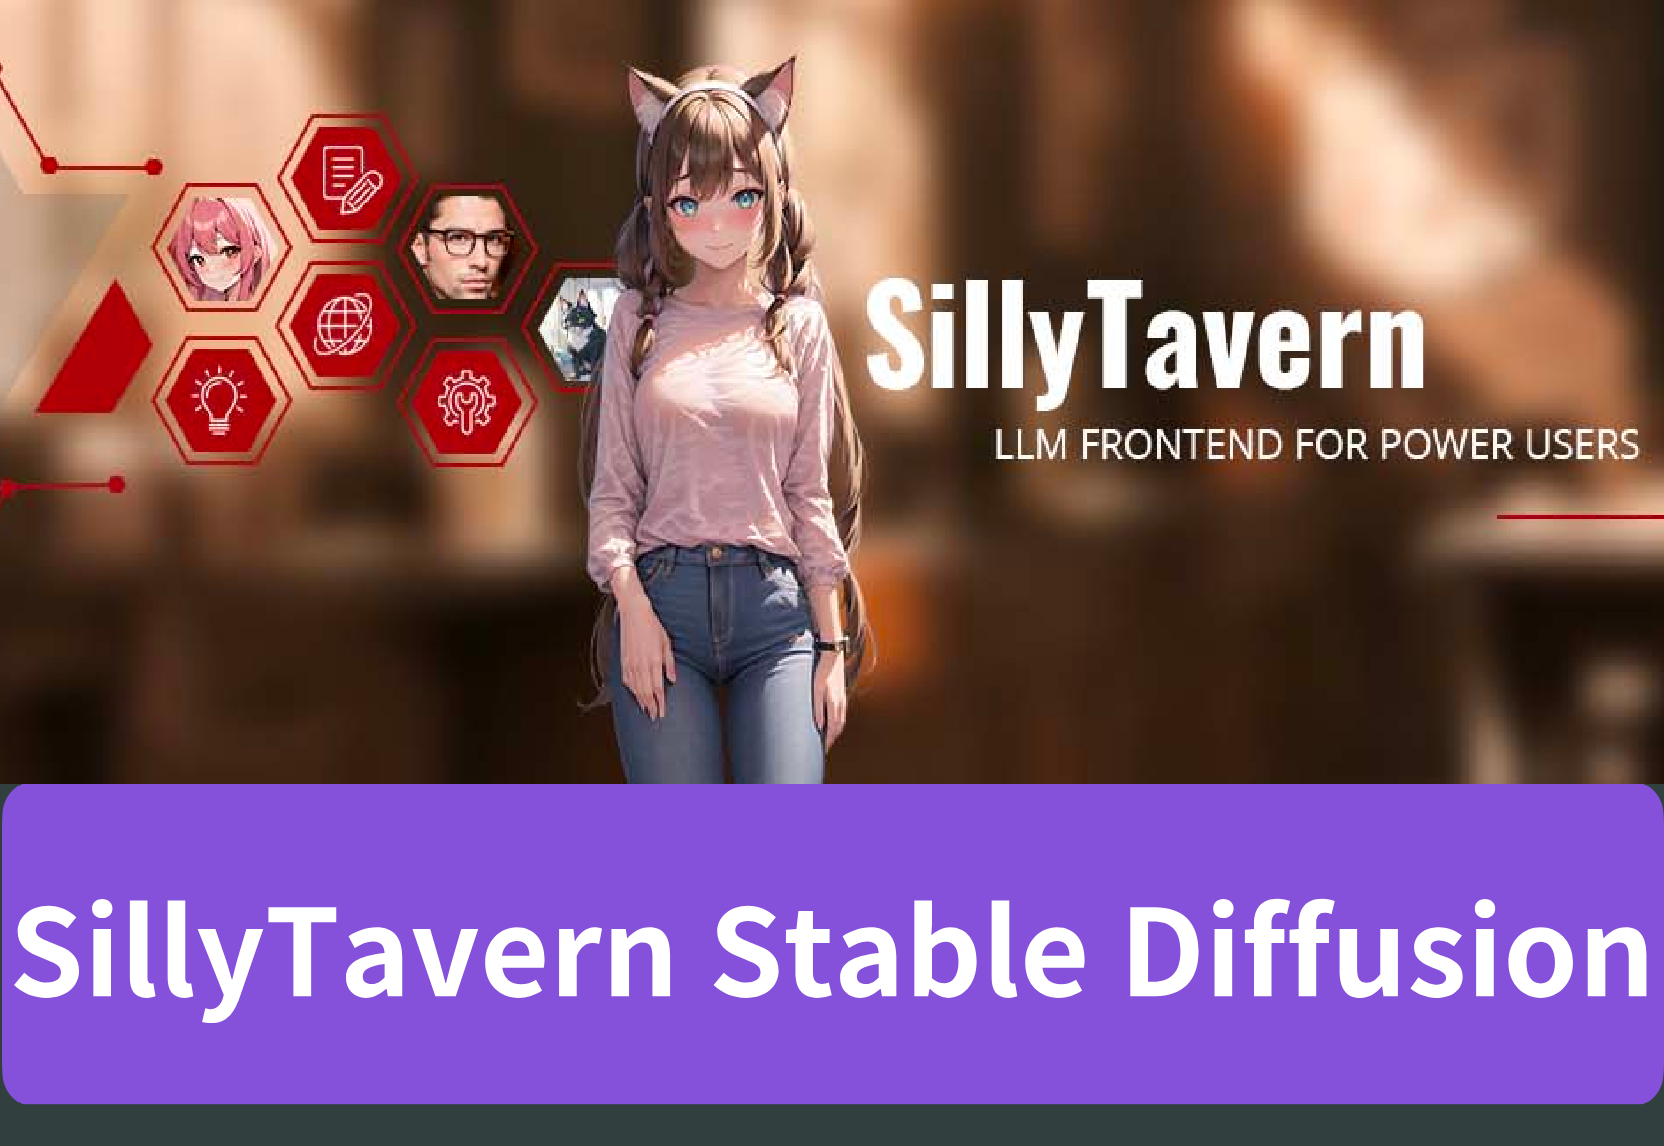 The Ultimate Guide to SillyTavern Stable Diffusion